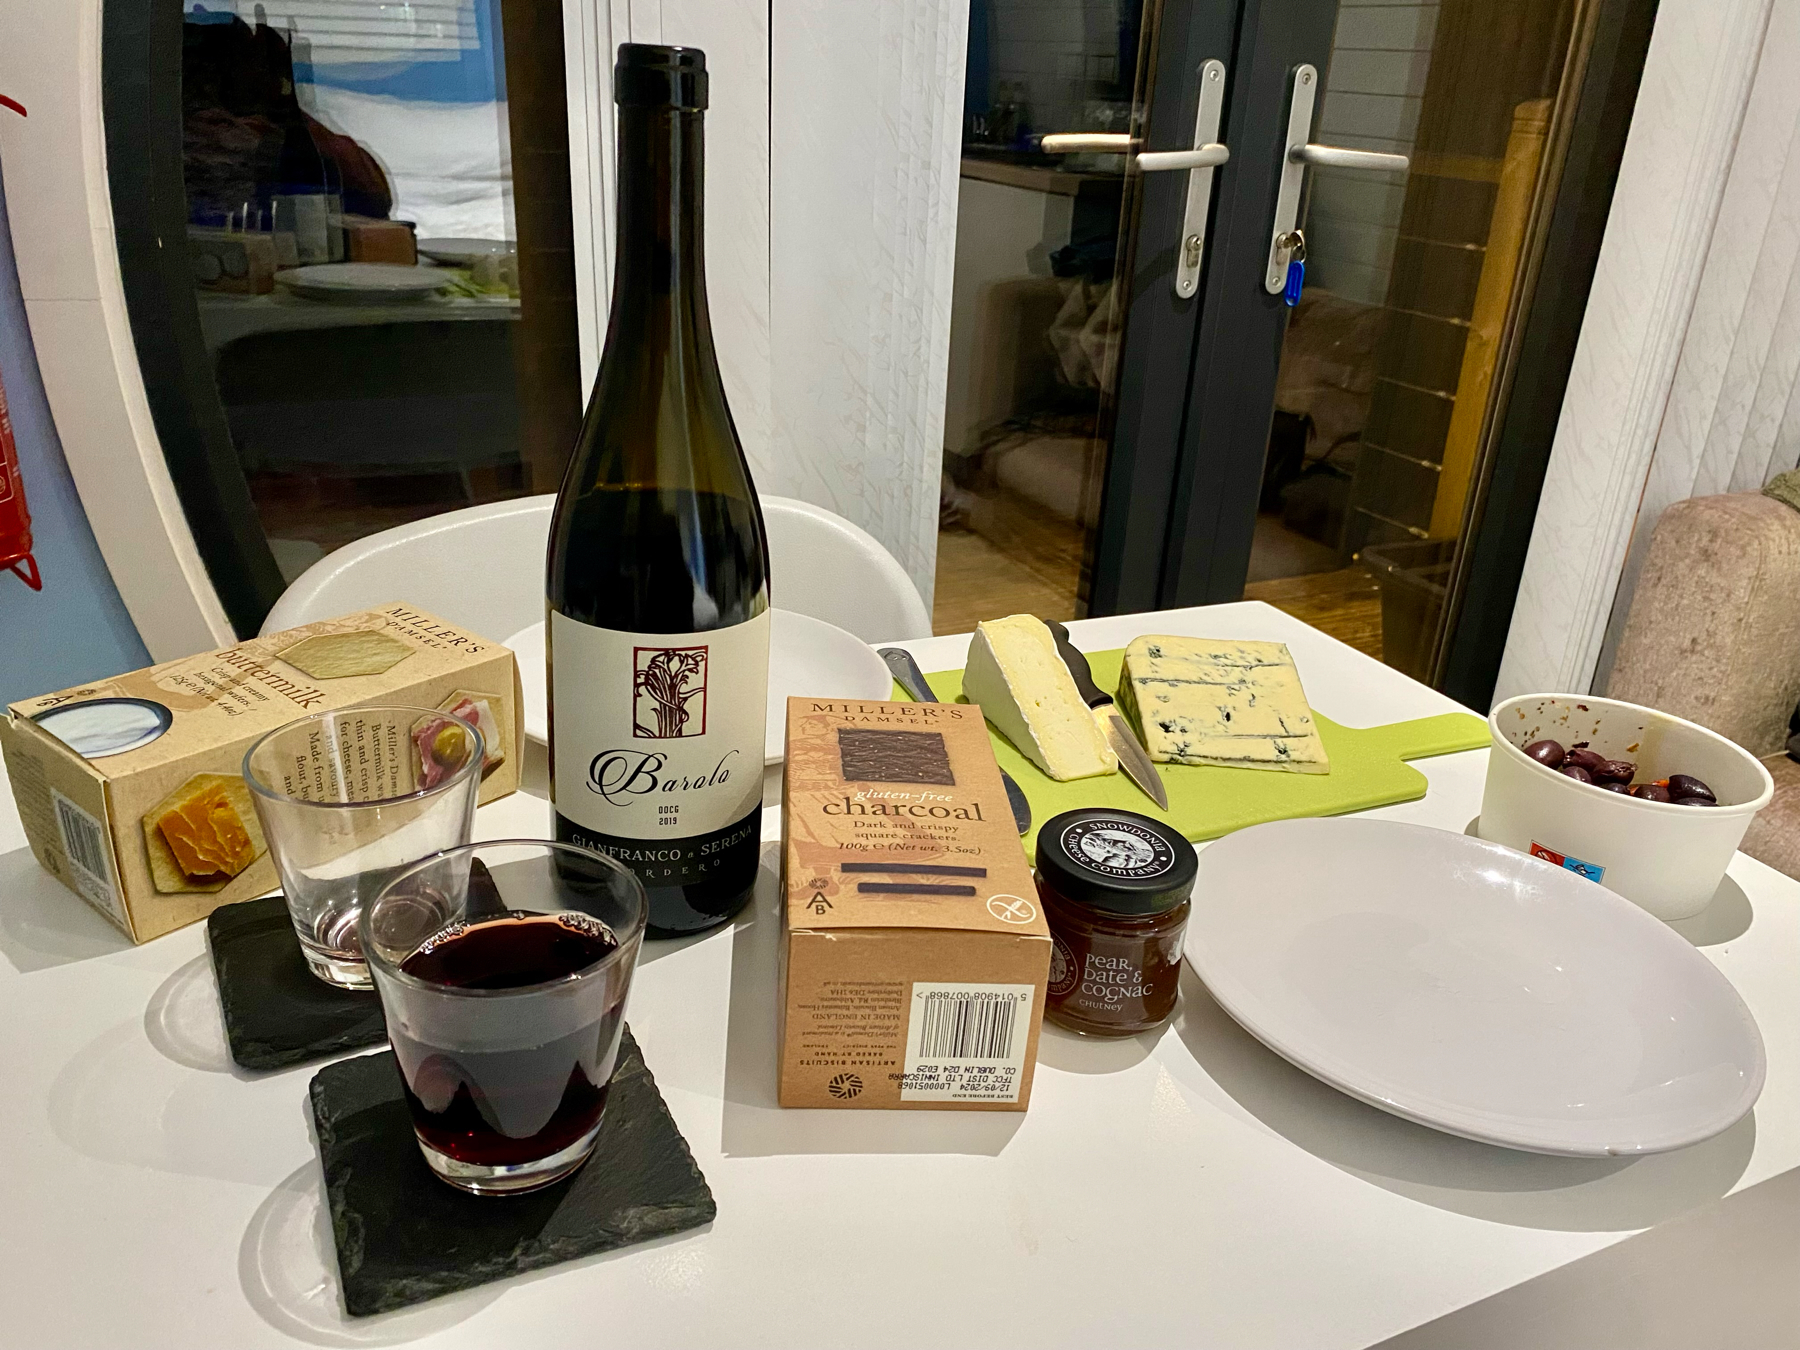 A table set with a bottle of Barolo wine, two glasses, a box of crackers, a plate of cheese, a bowl of olives, and a small jar of pear and date chutney.